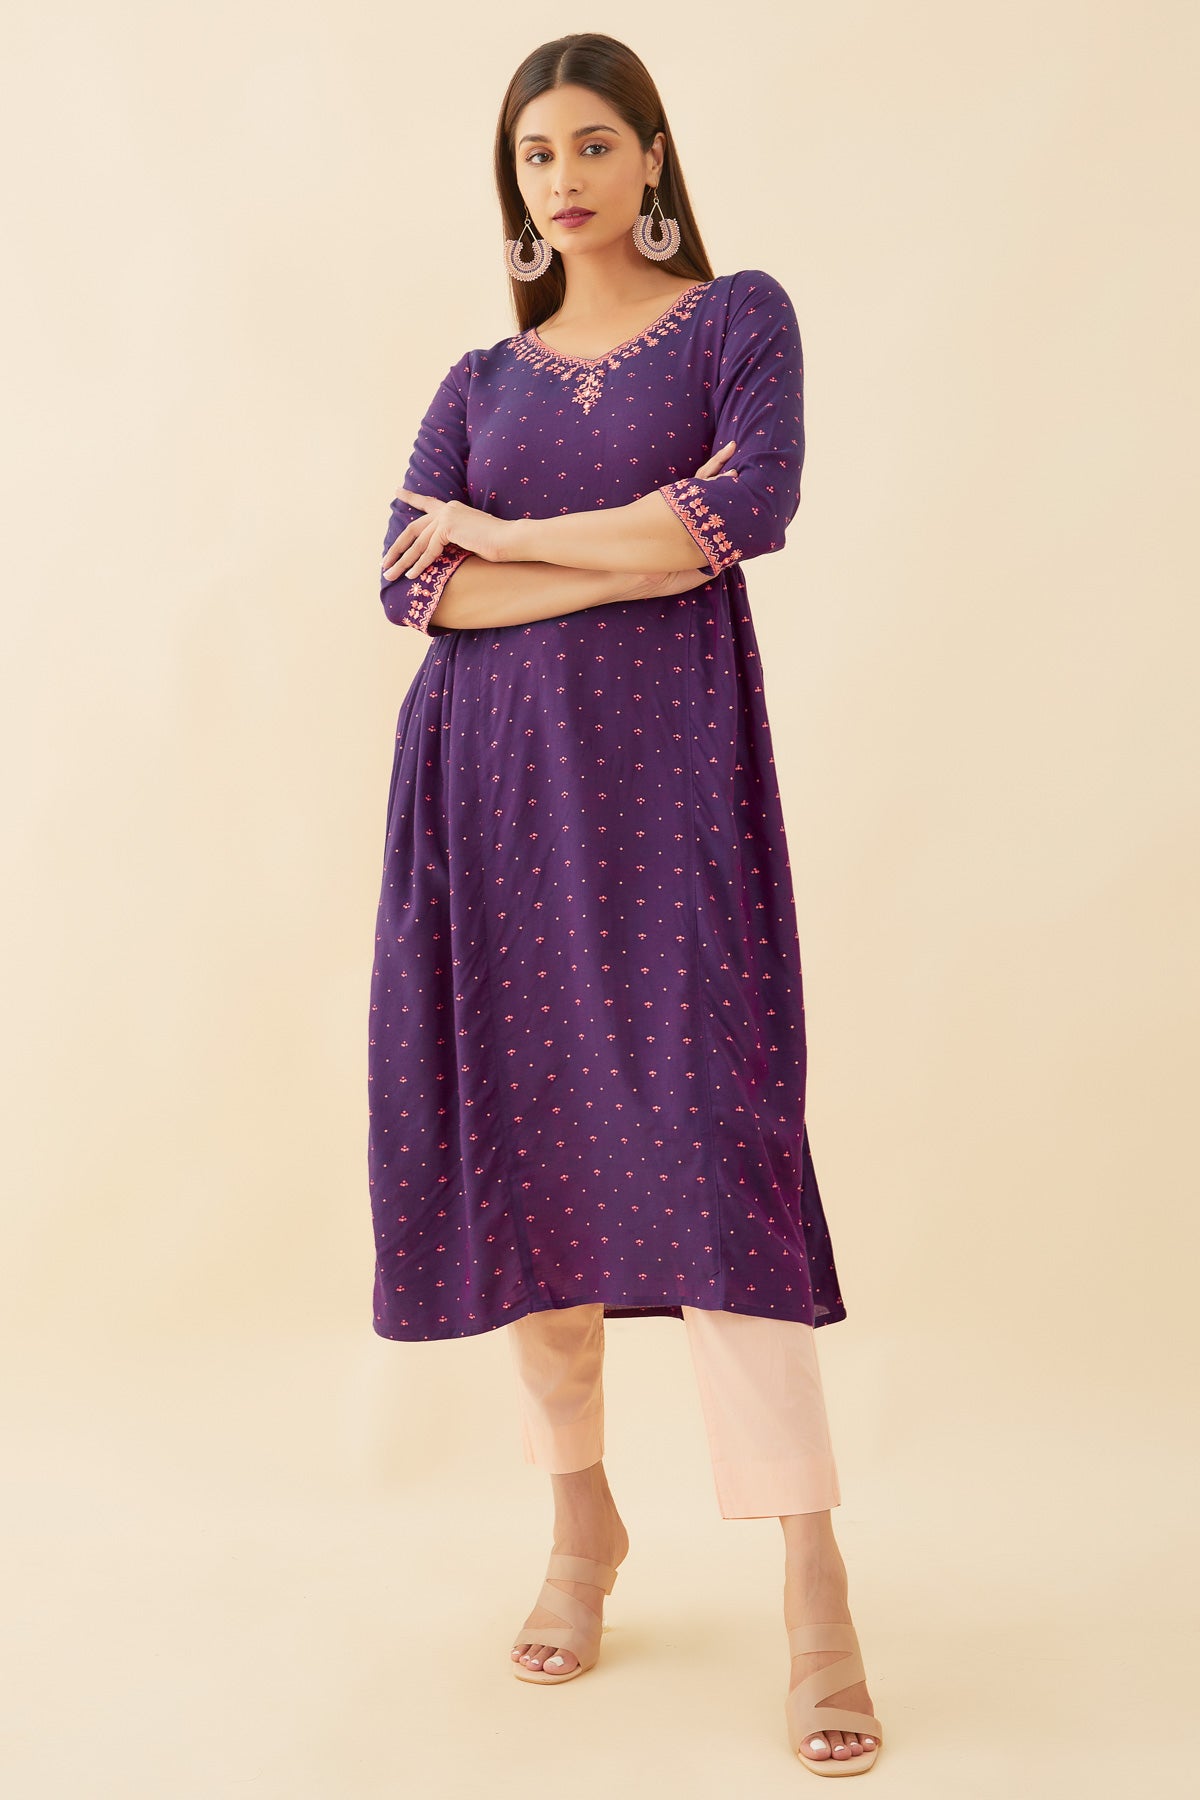 All Over Geometric Print With Foil Mirror Detail Embellished A-Line Kurta - Purple